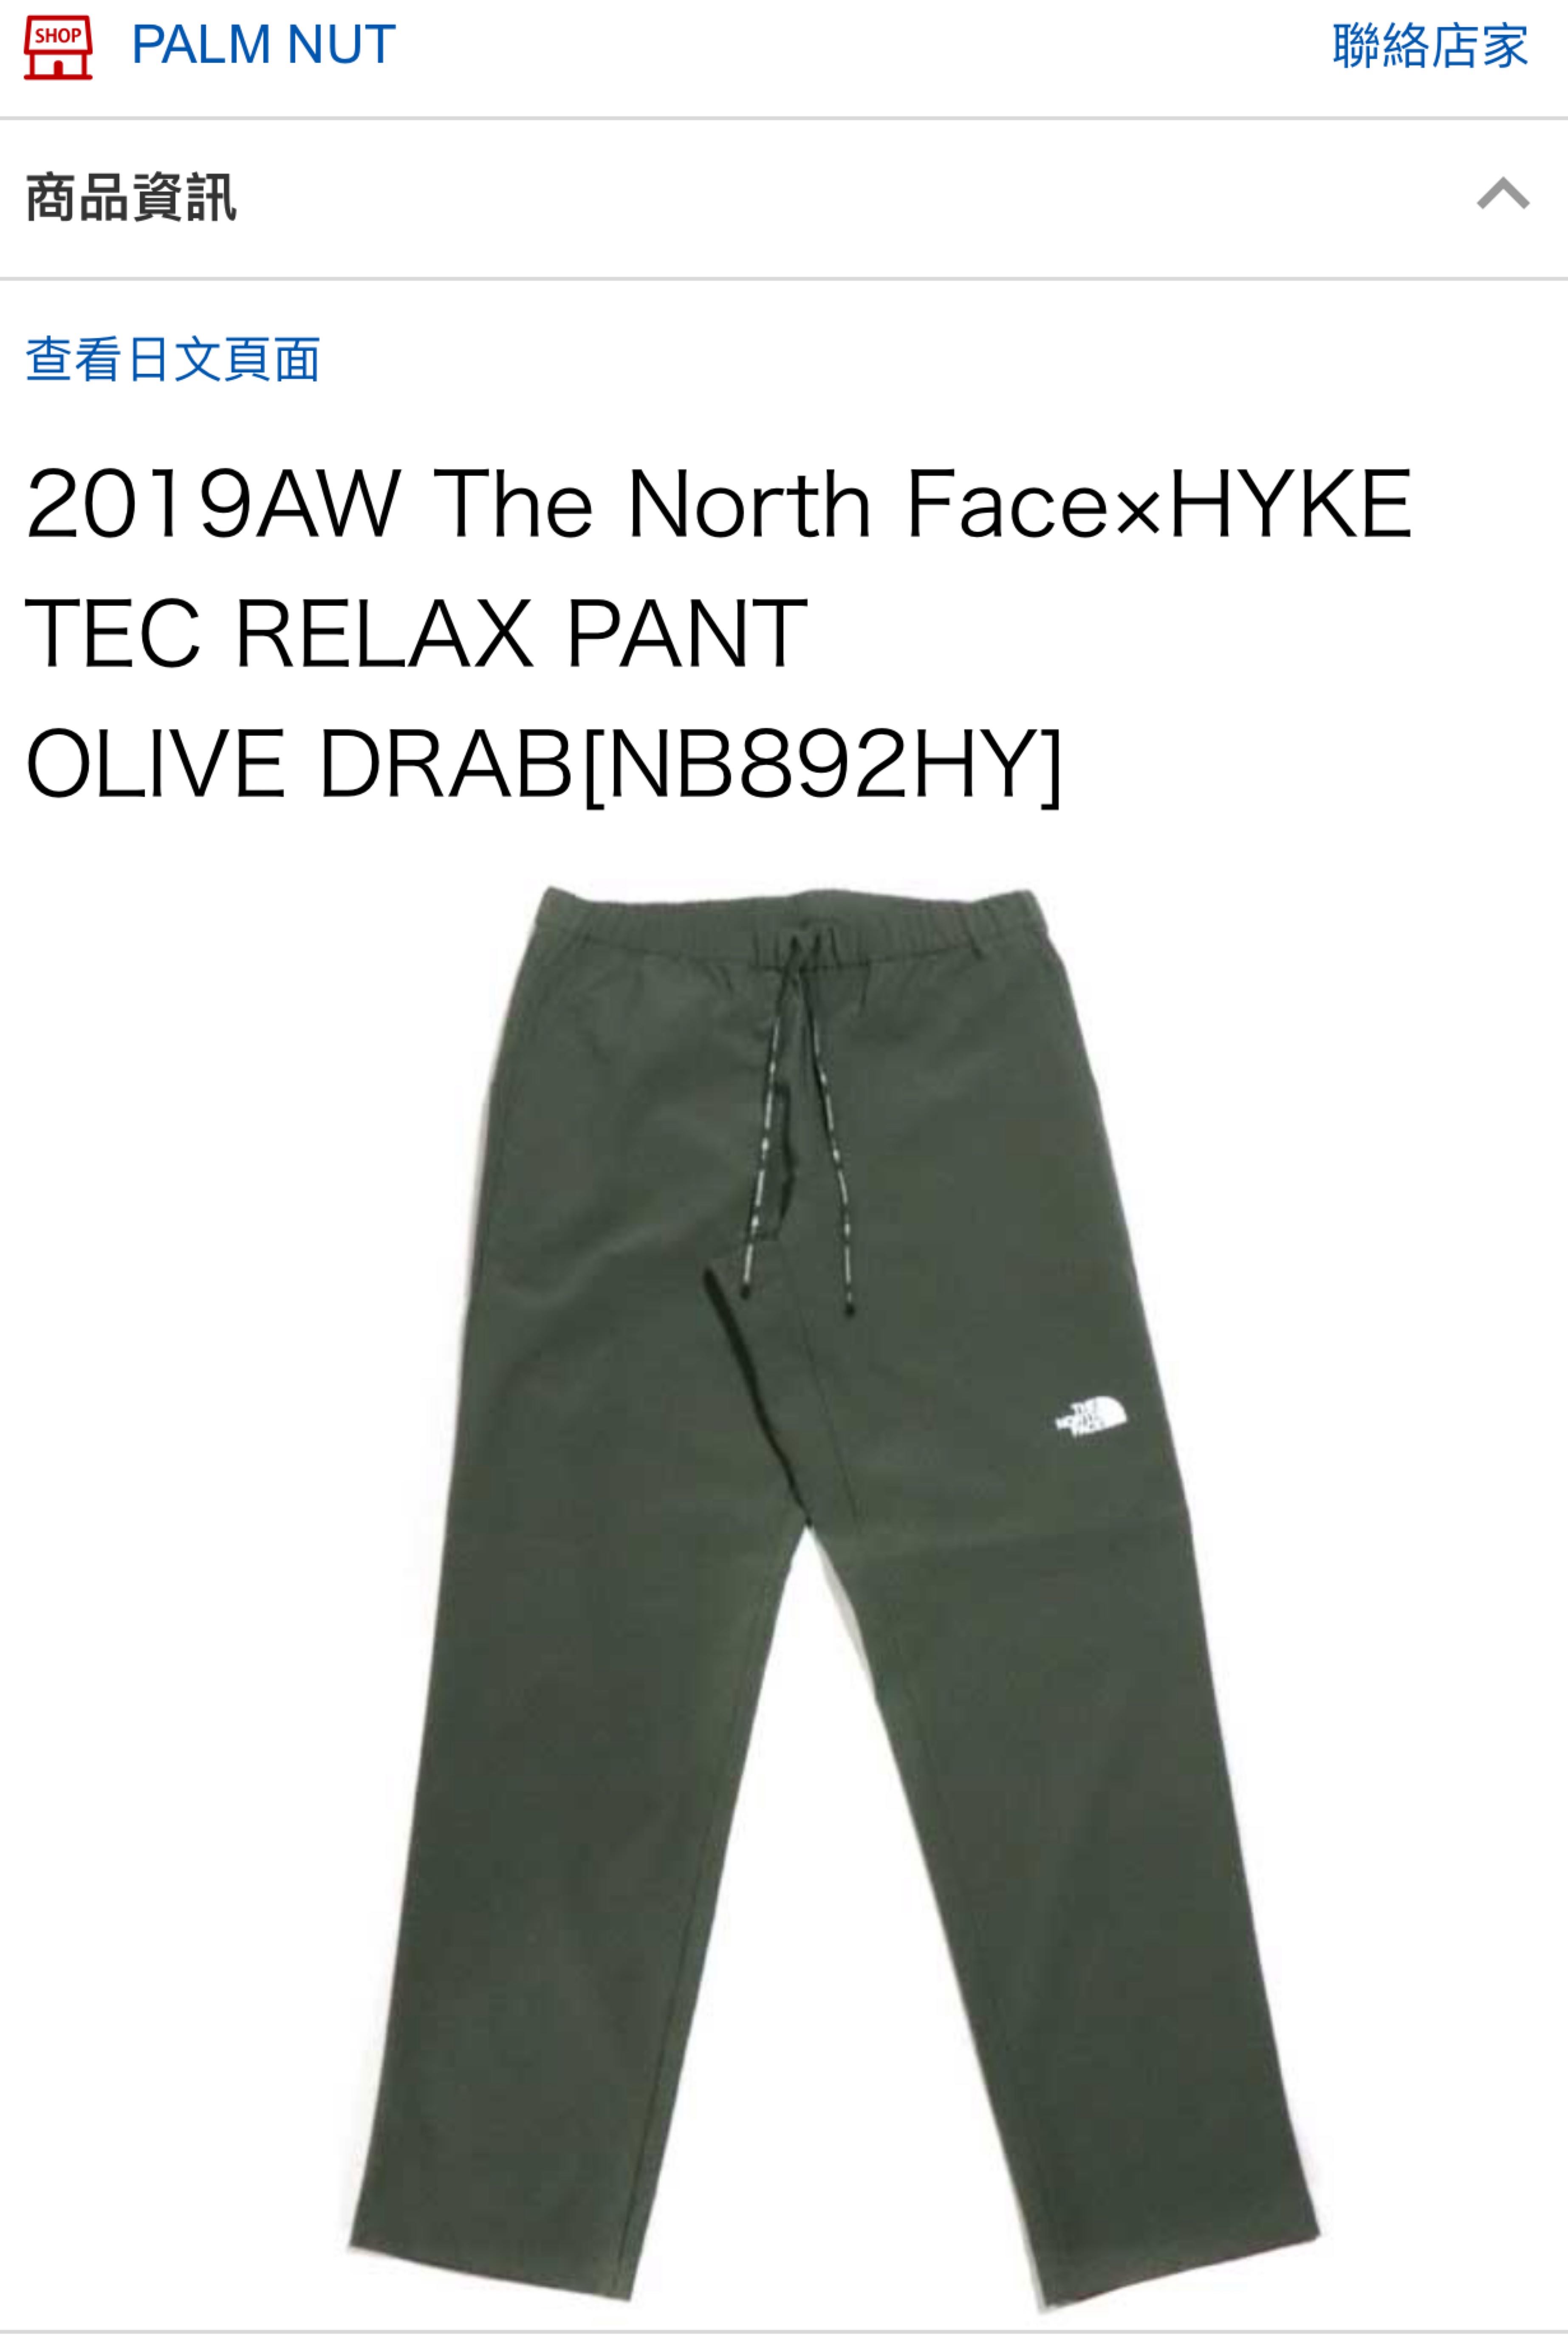 The north face Hyke Tec relax pant S